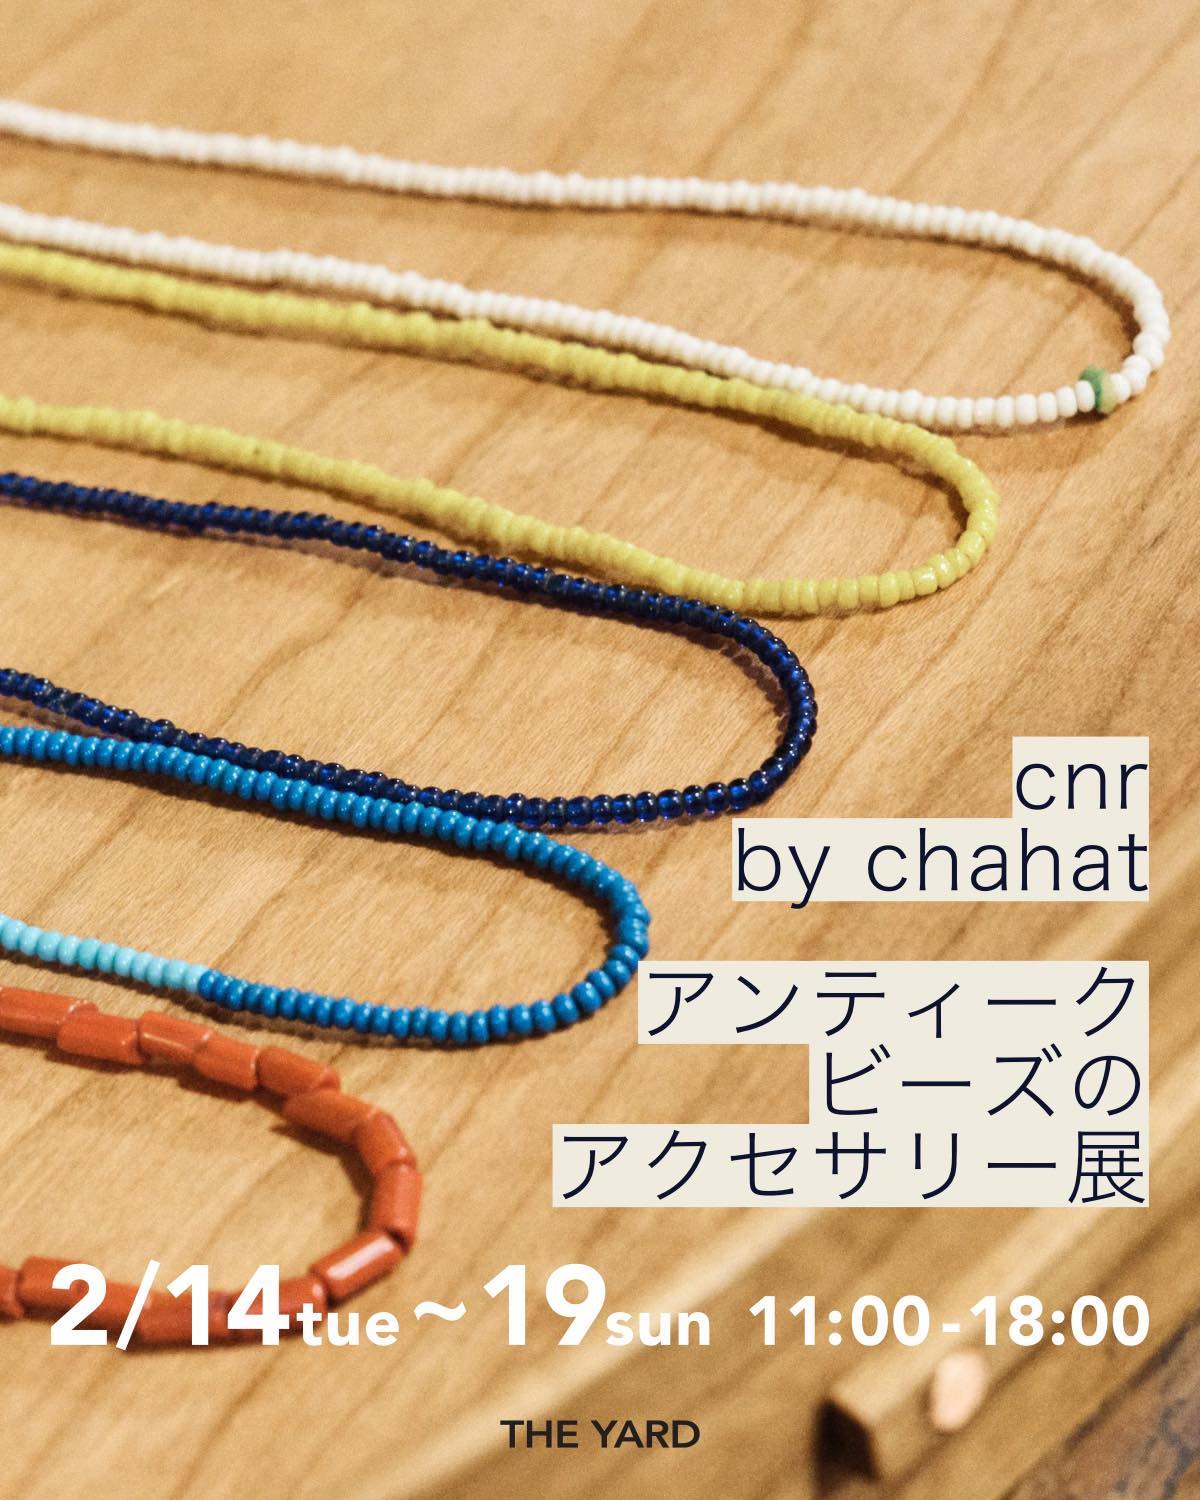 cnr by chahat @ THE YARD